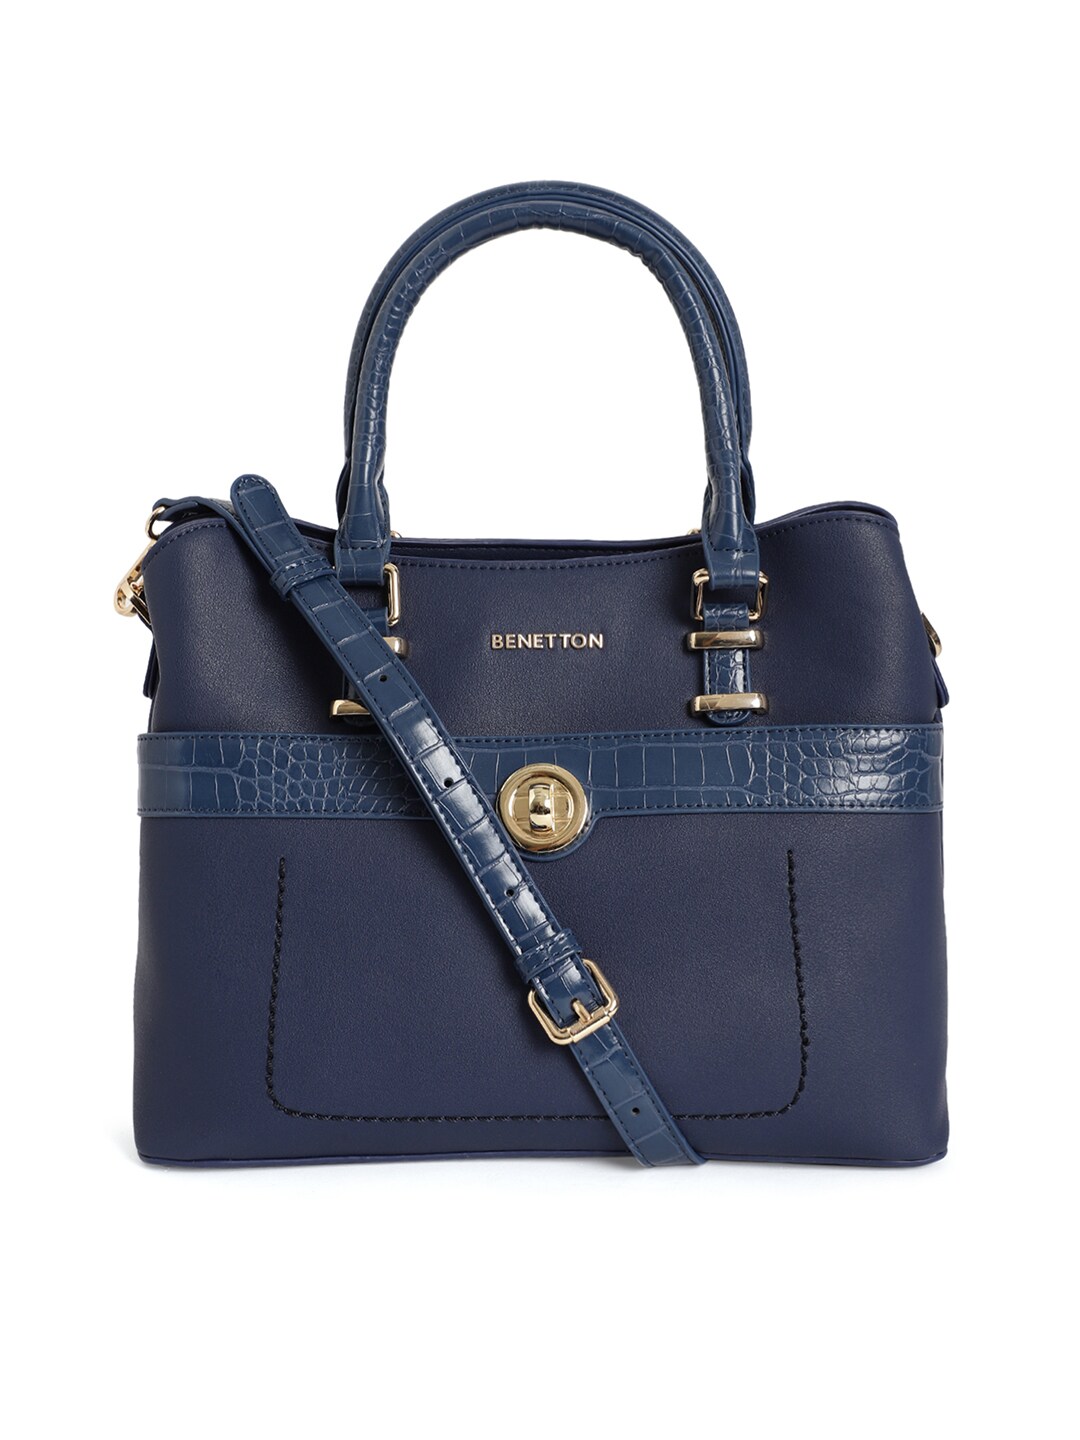 United Colors of Benetton Navy Blue Handheld Bag Price in India